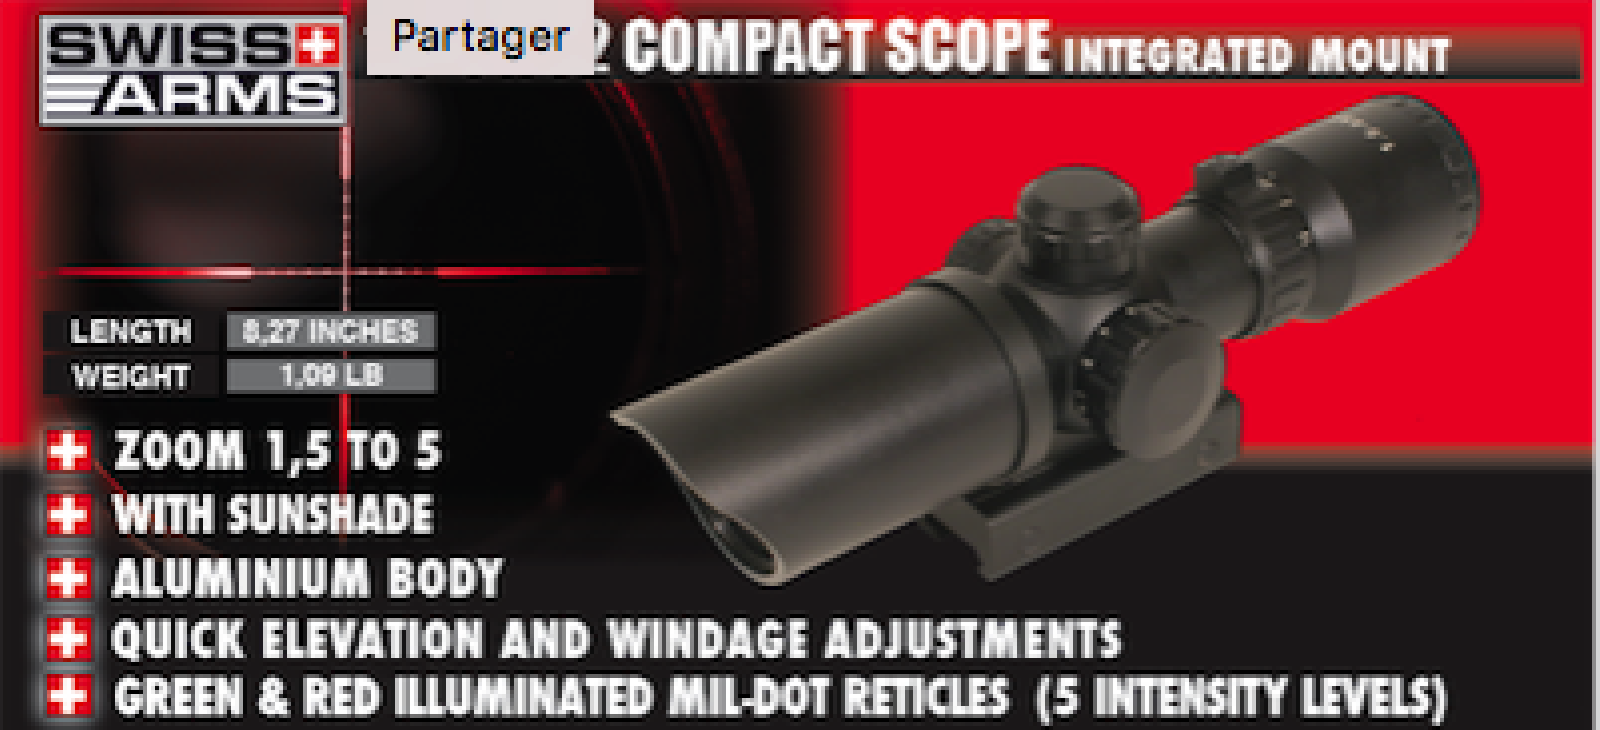 SWISS ARMS Aiming Scope Compact 1.5-5 x 32 Green/Red Reticle 5 levels/C24